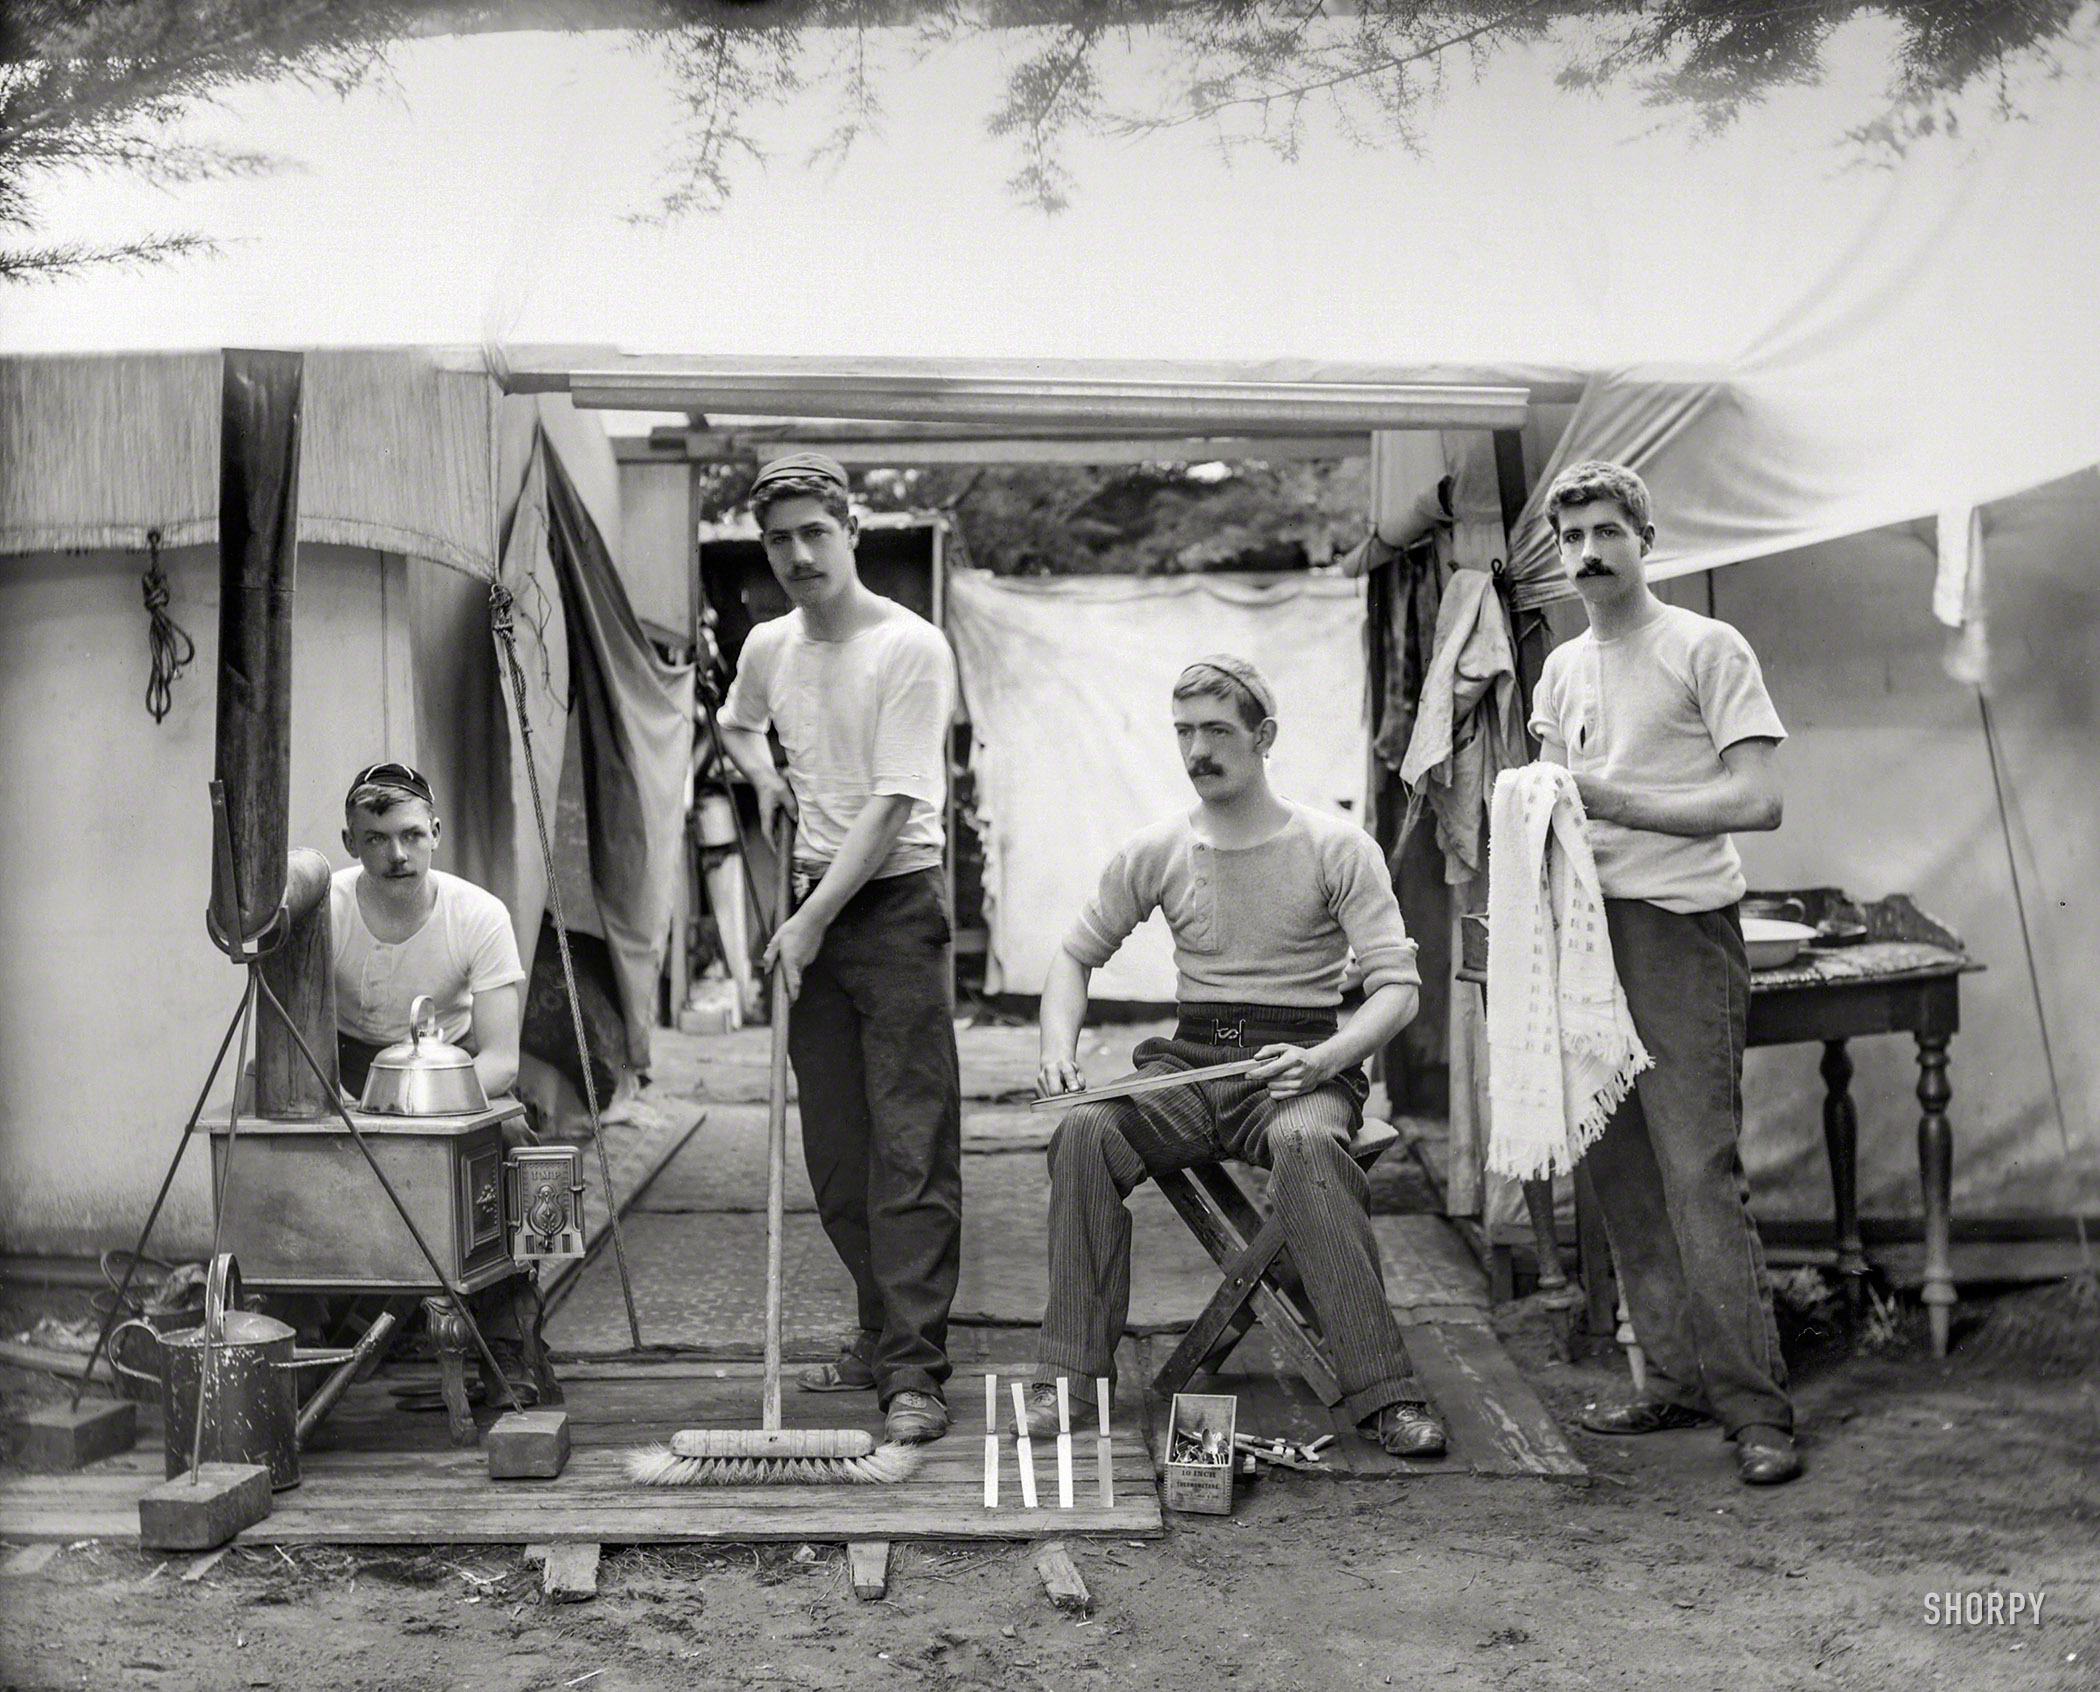 New Zealand circa 1905. "Young men doing chores, next to tent at a camp site, probably Christchurch district." Glass negative by Adam Maclay. View full size.